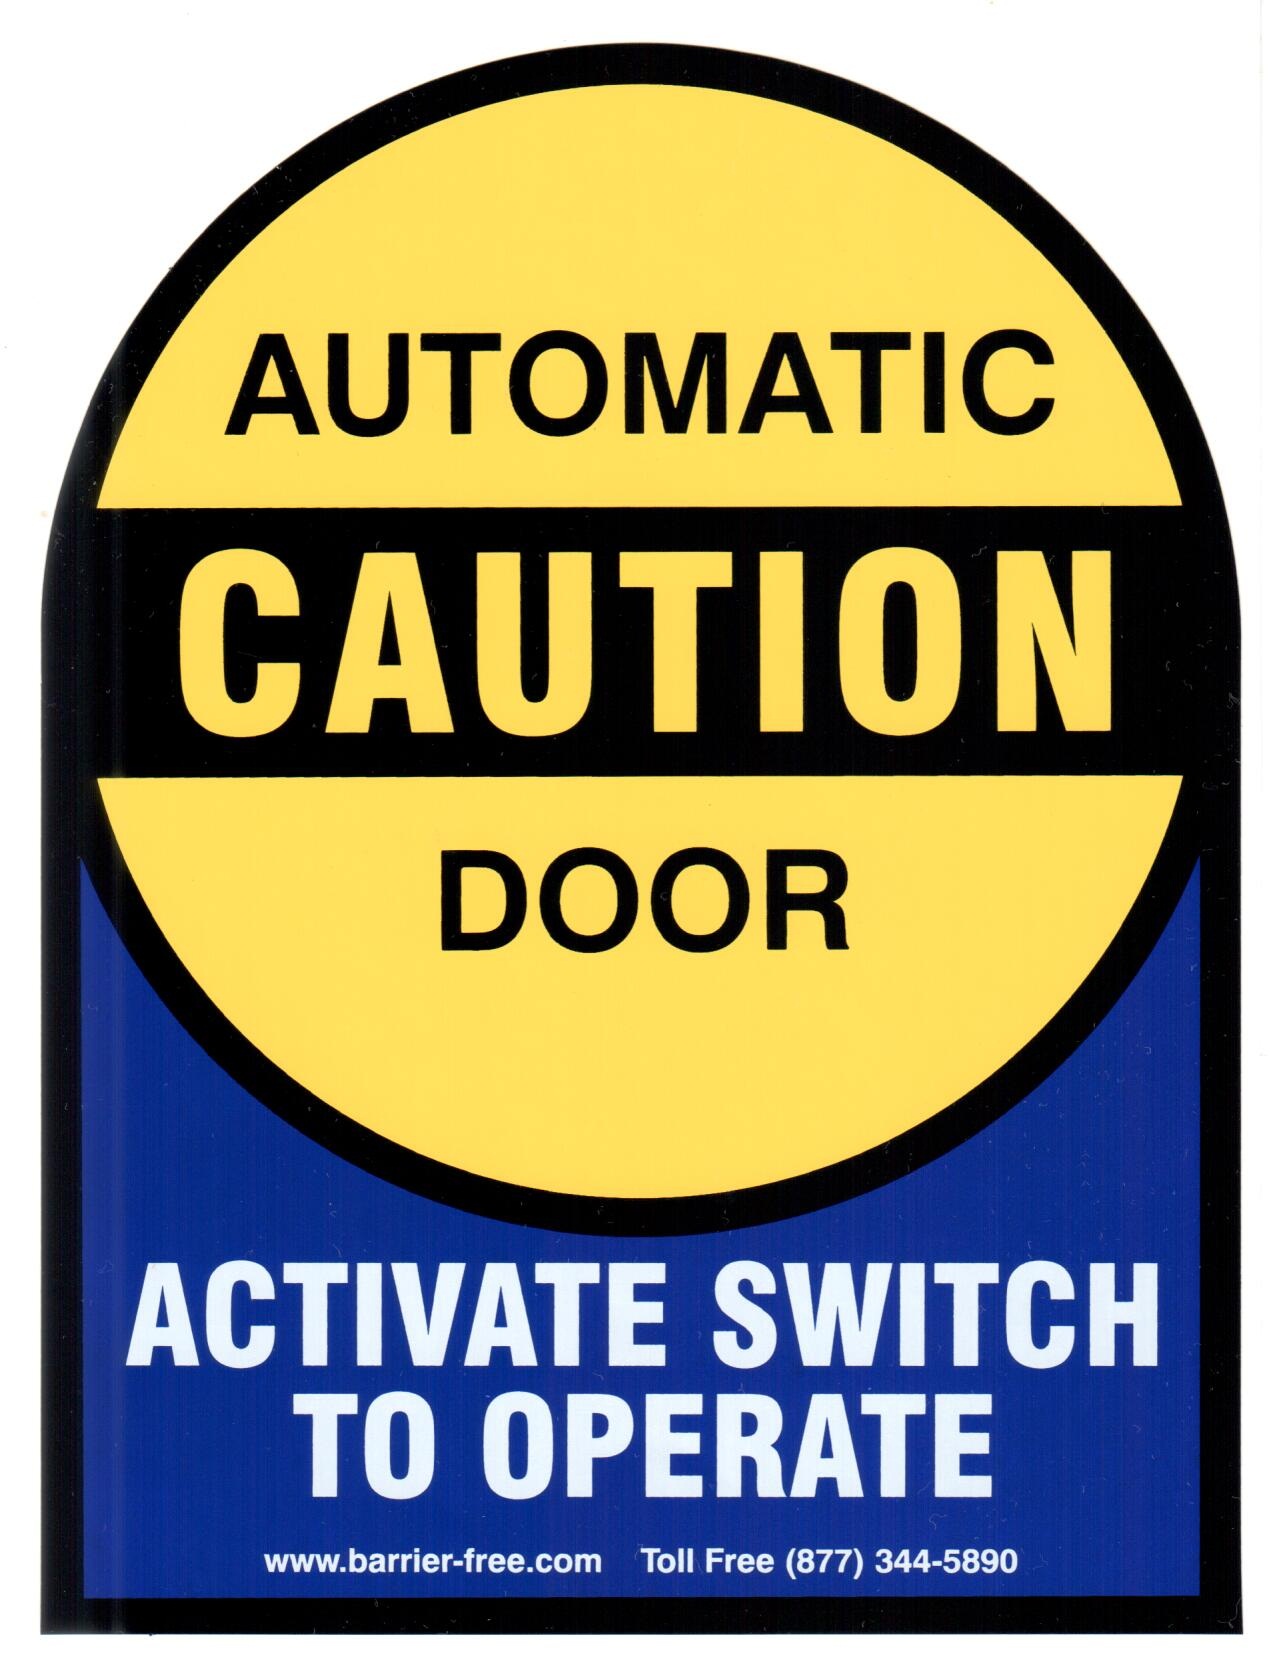 Caution Automatic Door Decal with Activate Switch to Operate